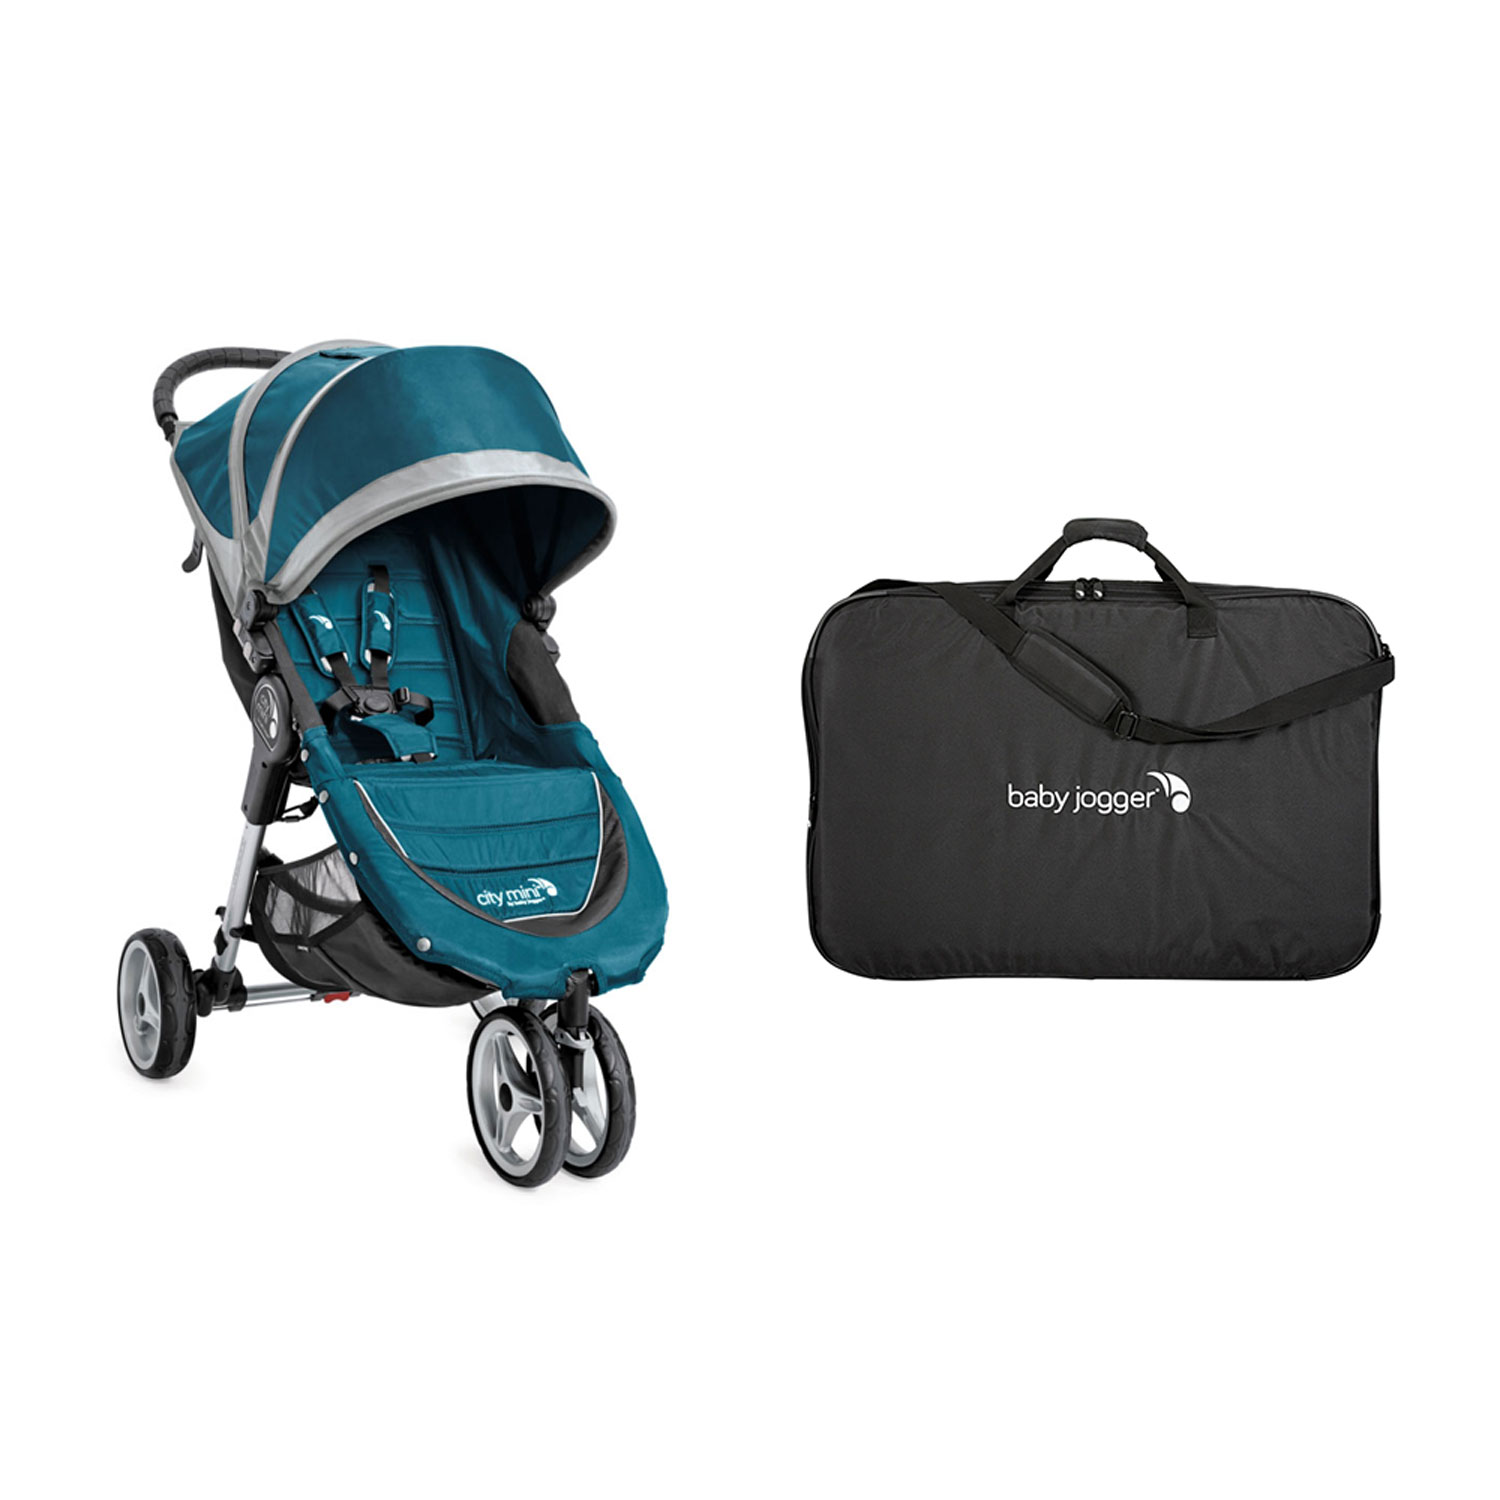 Baby Jogger City Mini Compact Baby Travel Stroller + Padded Travel Carry Bag eBay